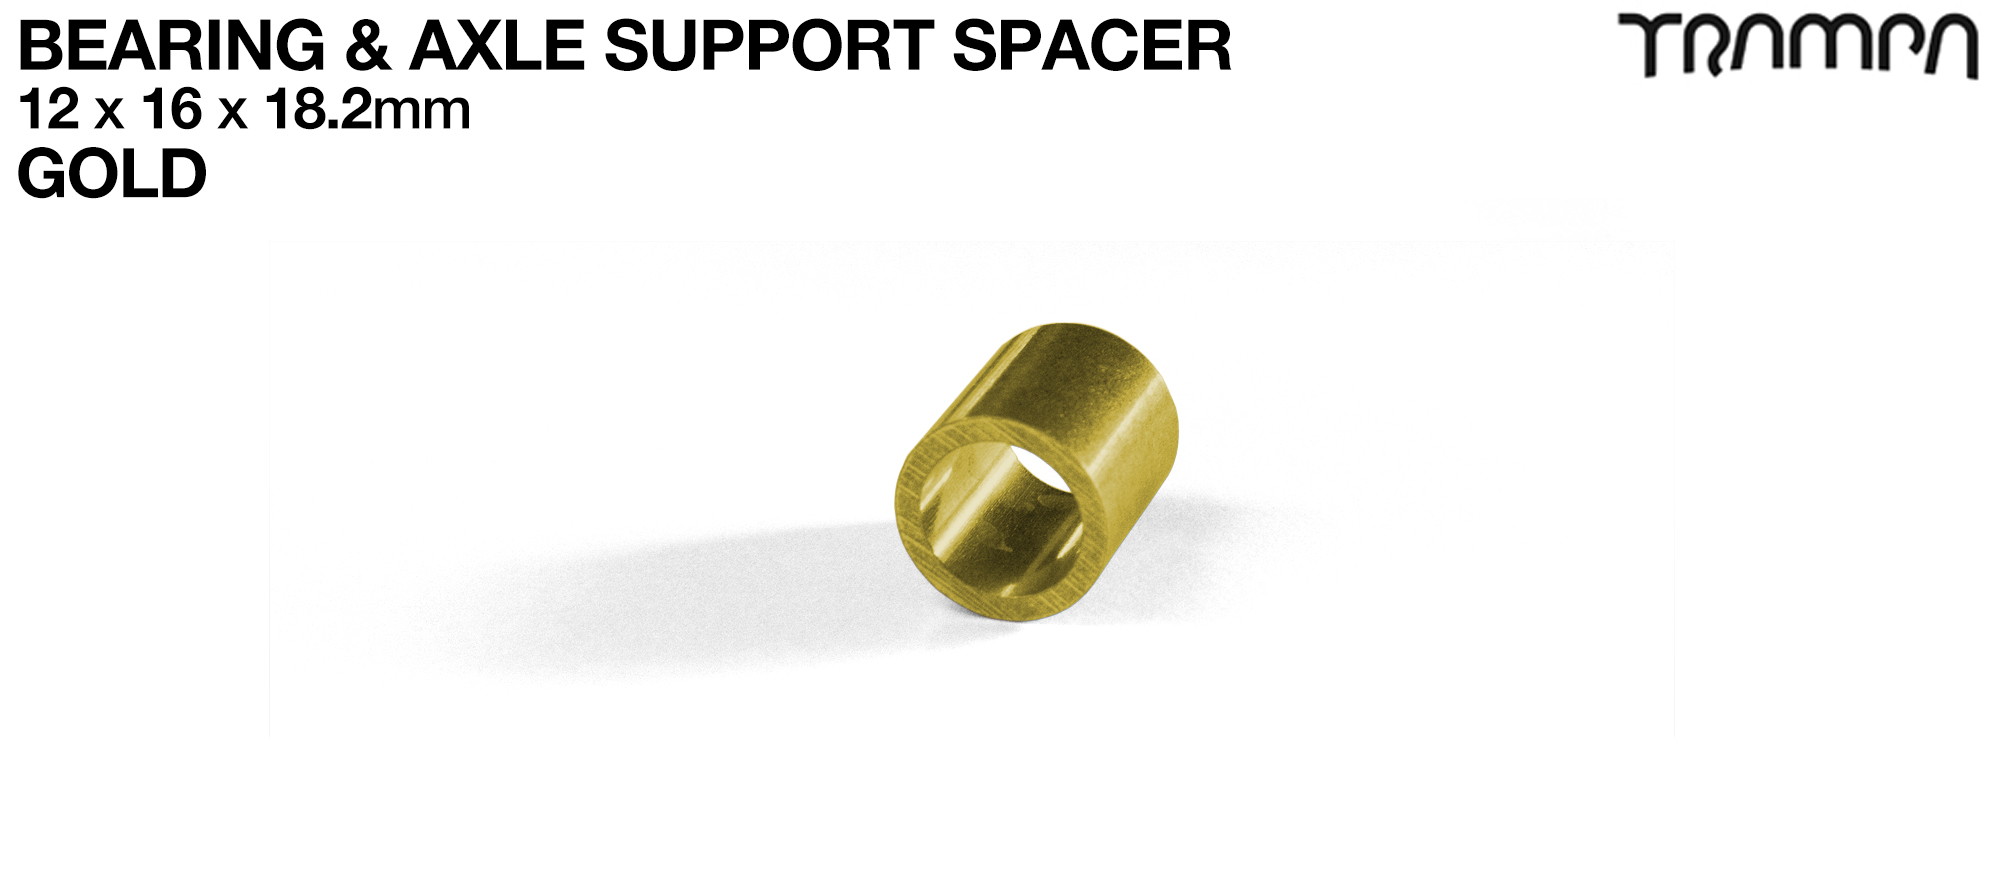 GOLD 18.2mm Wheel Support Axle Spacers 